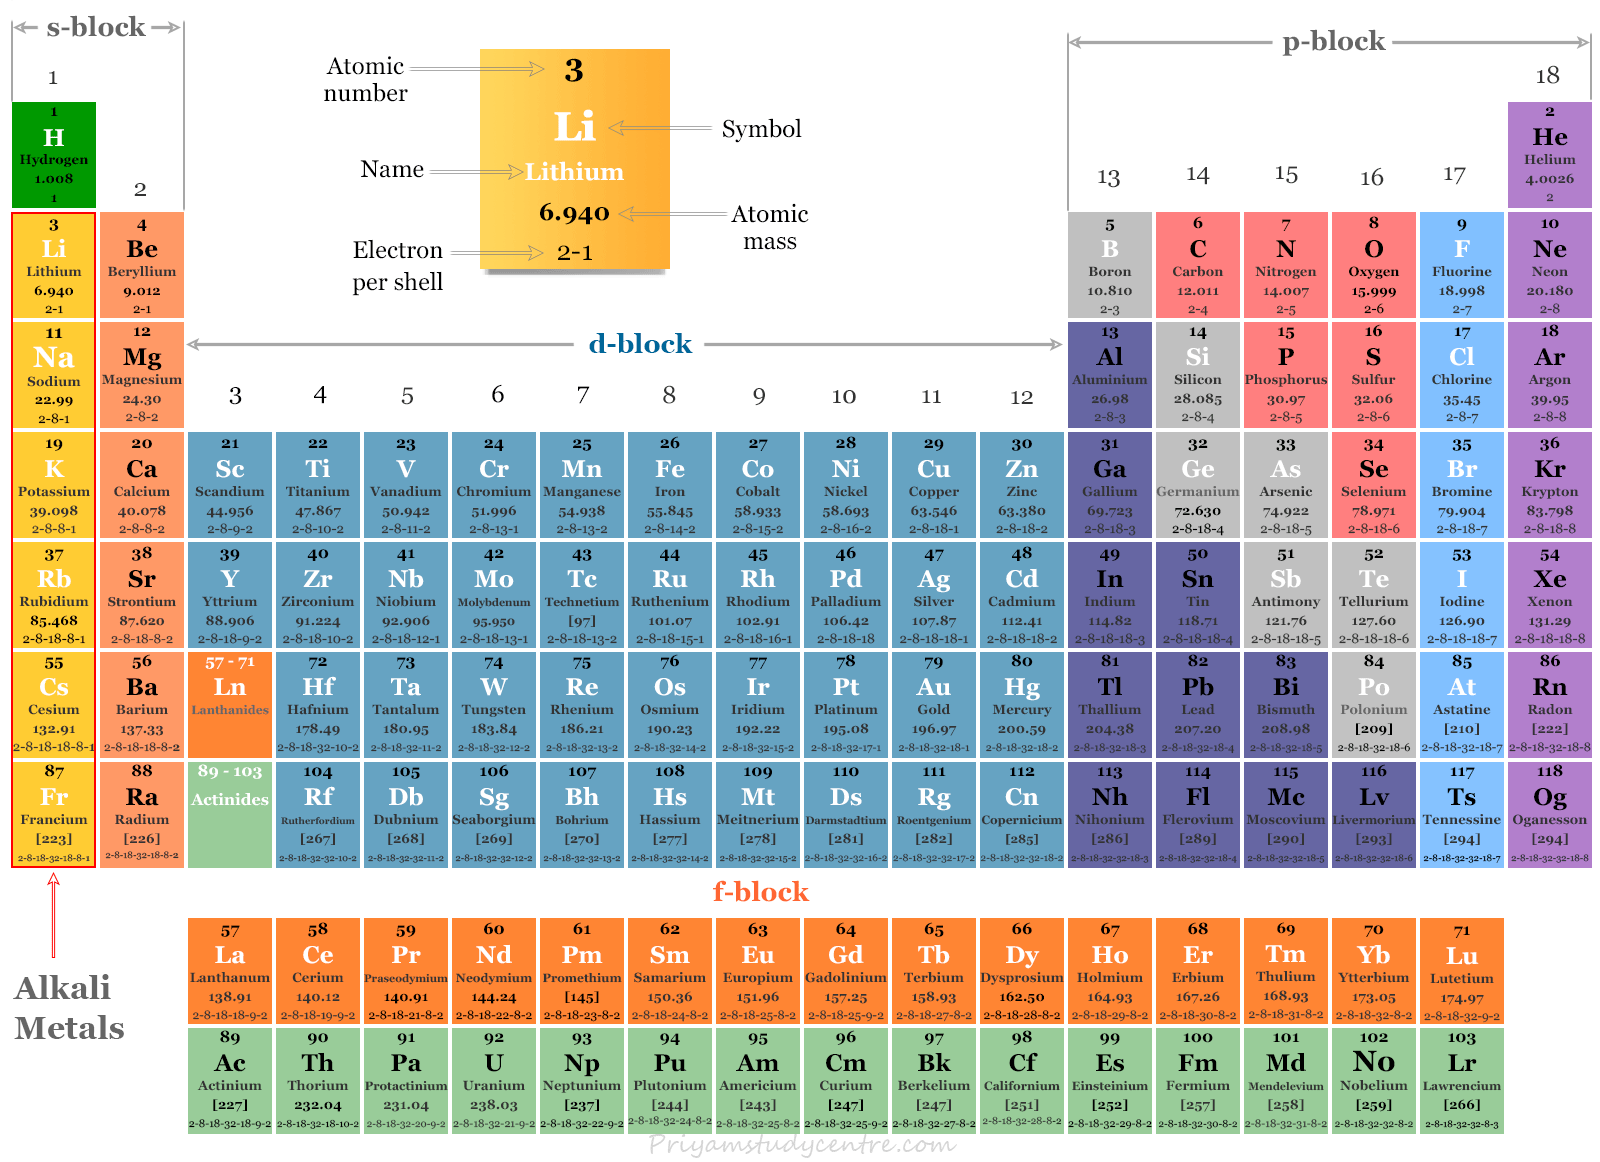 Information about alkali metals in periodic table, name, symbol, atomic number, and electronic configuration of alkali metal